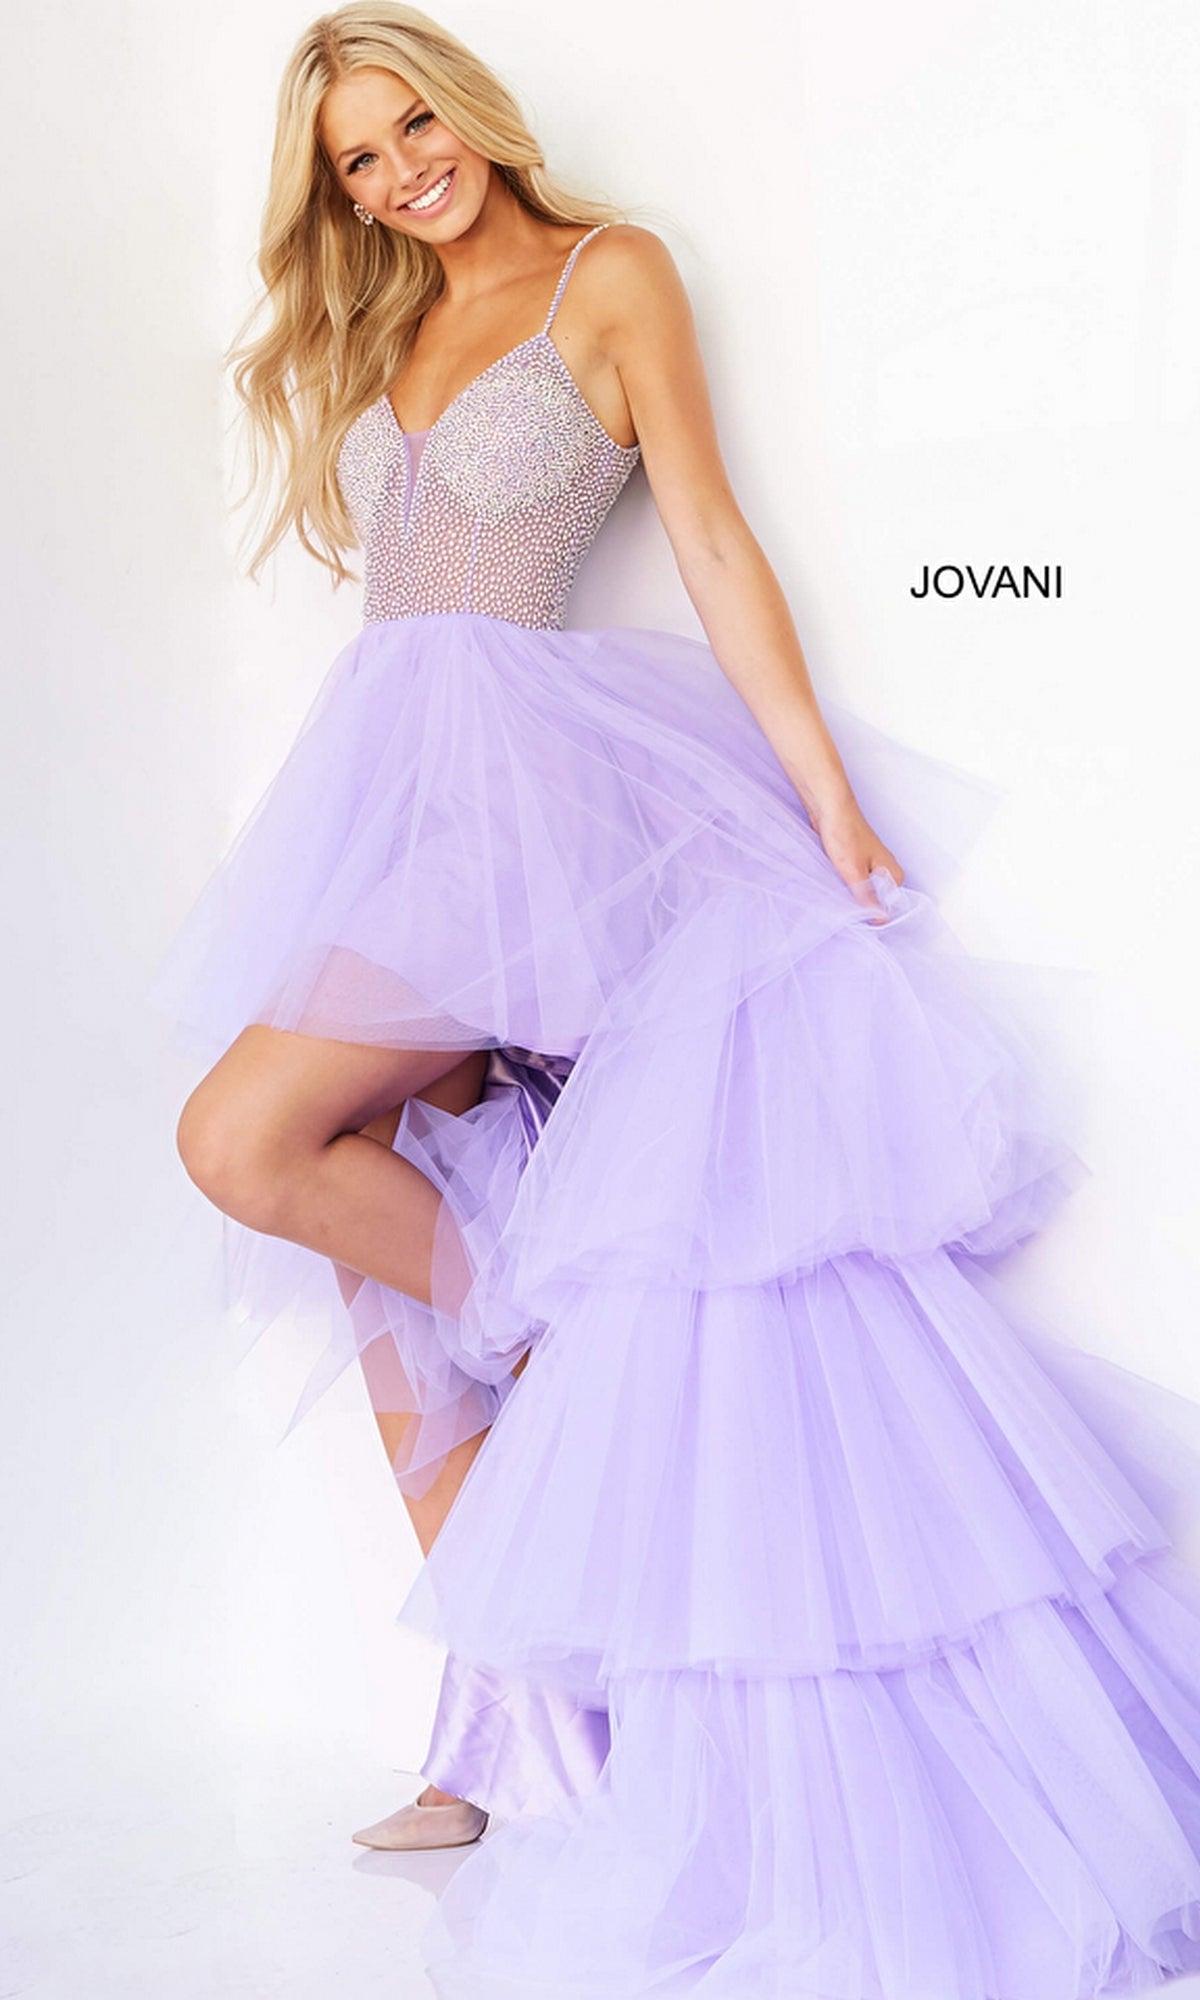 Sheer-Bodice High-Low Prom Dress 07231 by Jovani